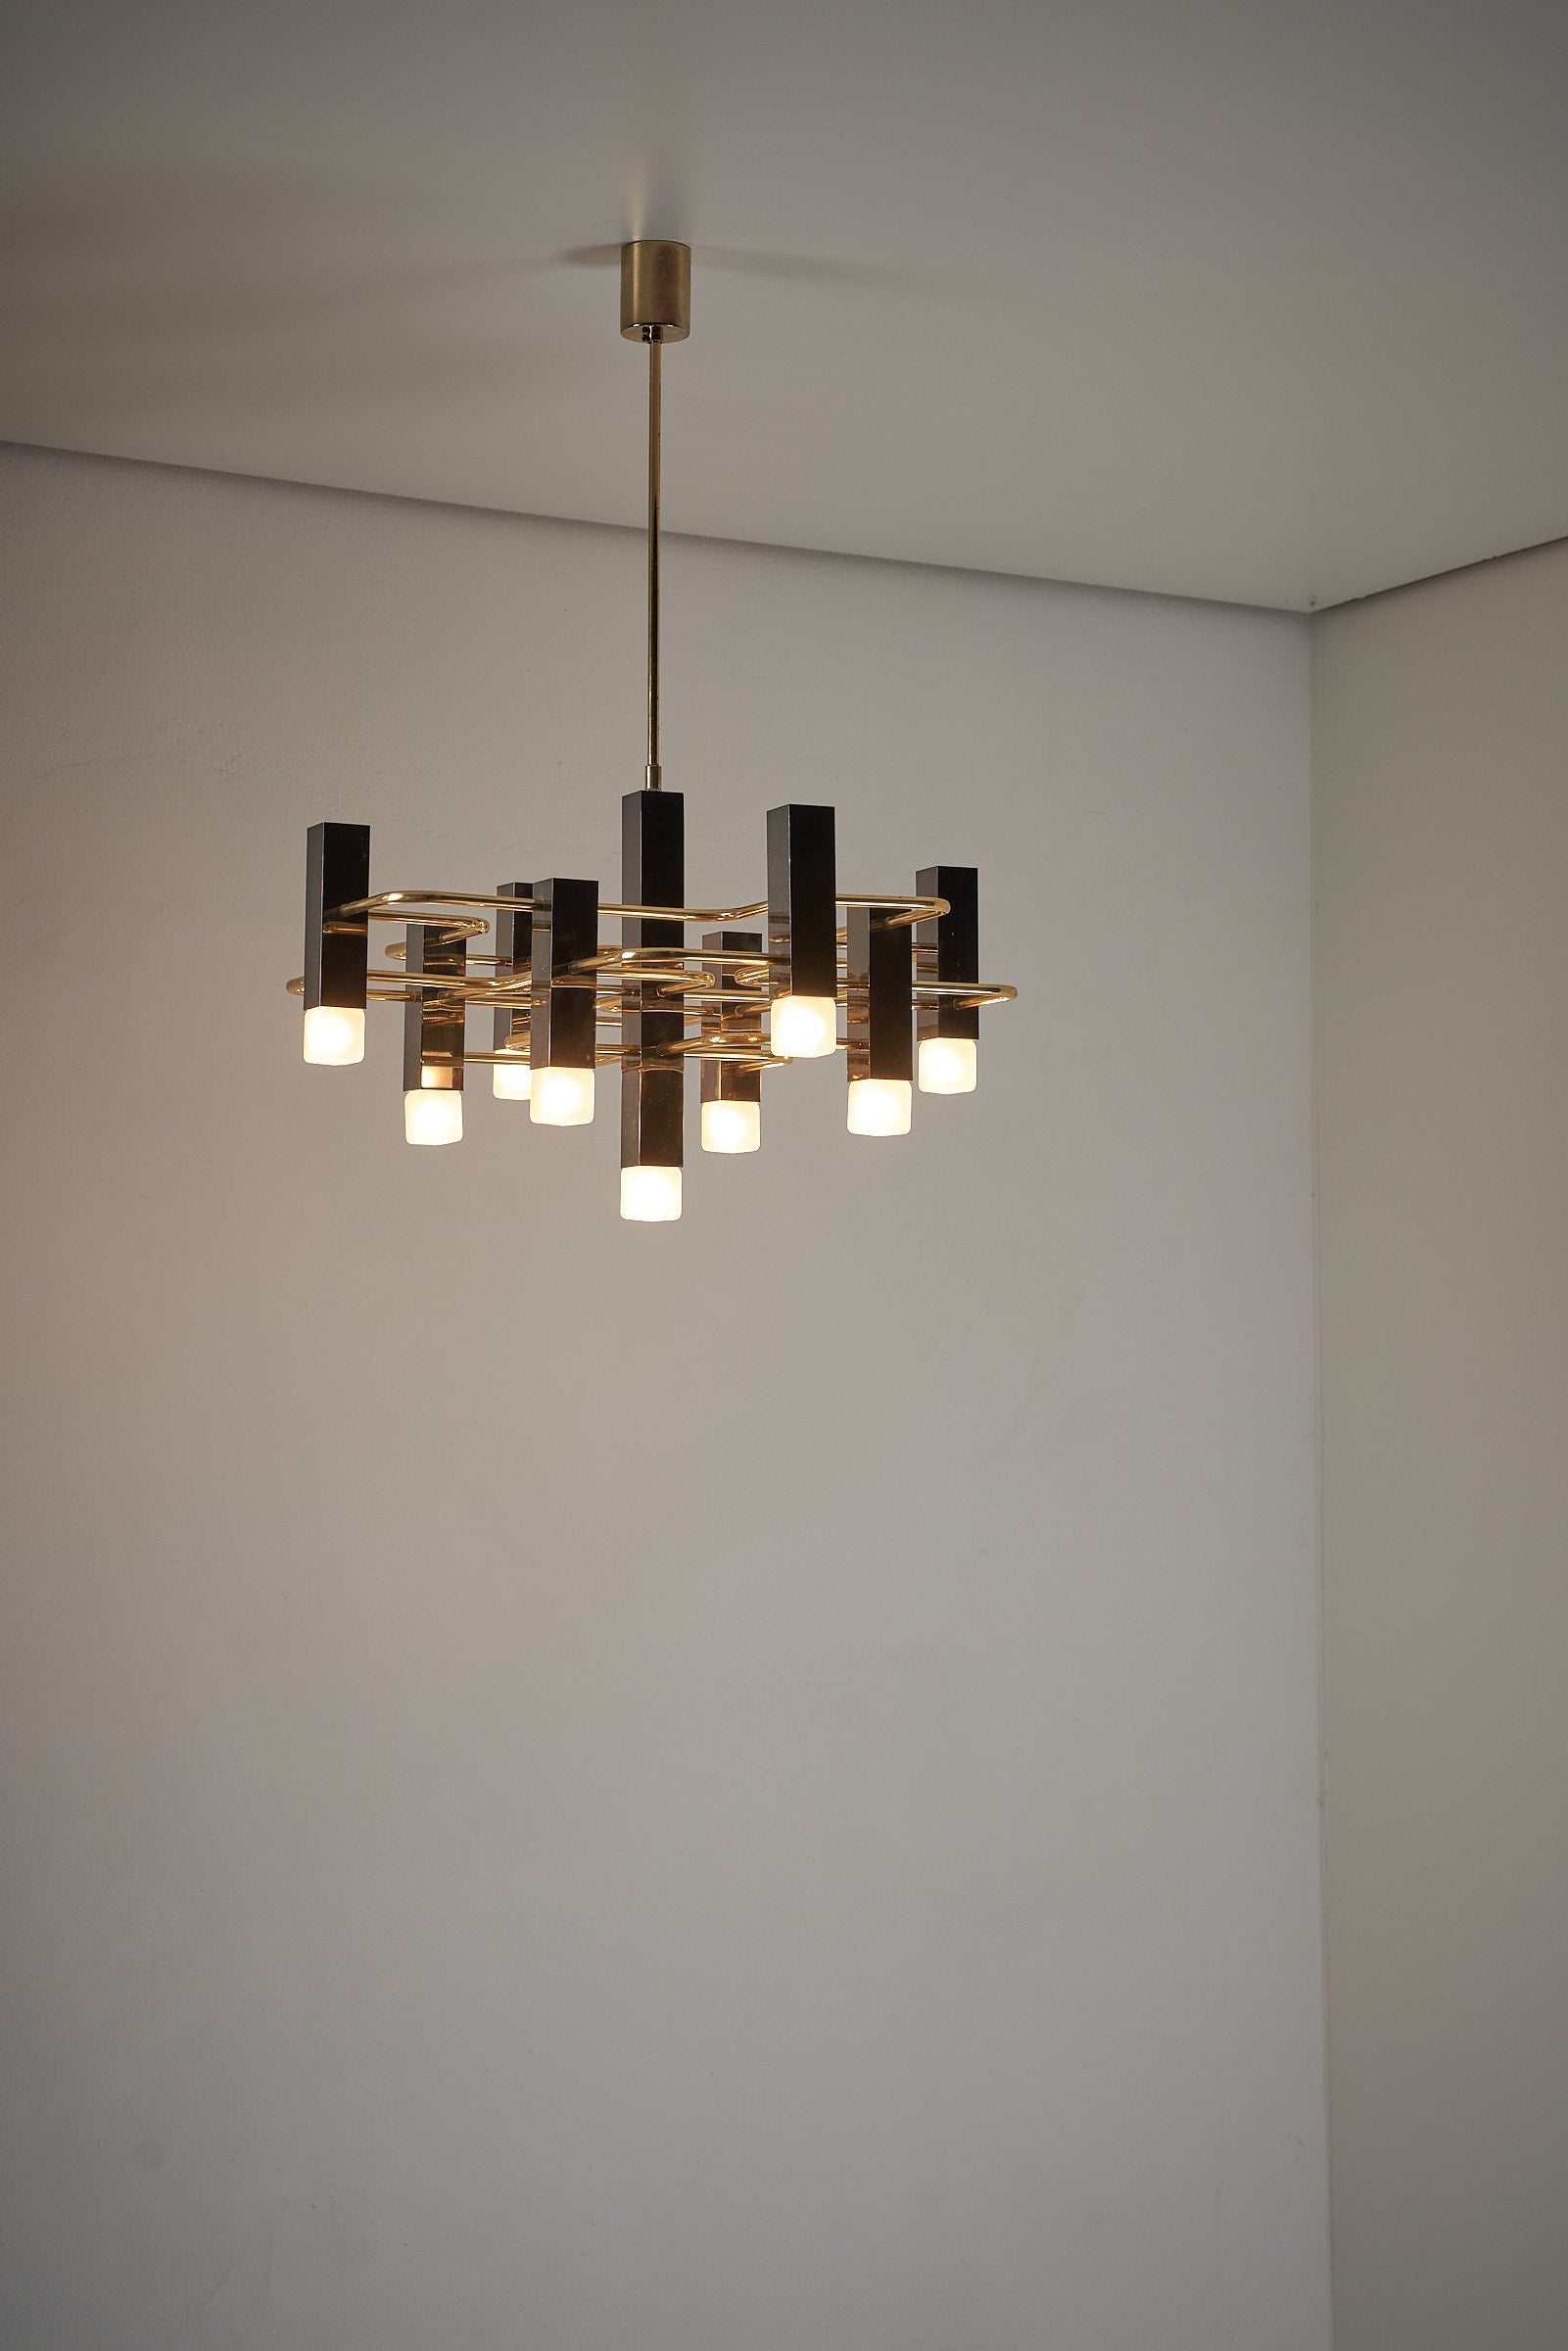 Geometric Chandelier by Sciolari for S.A. Boulanger from Belgium